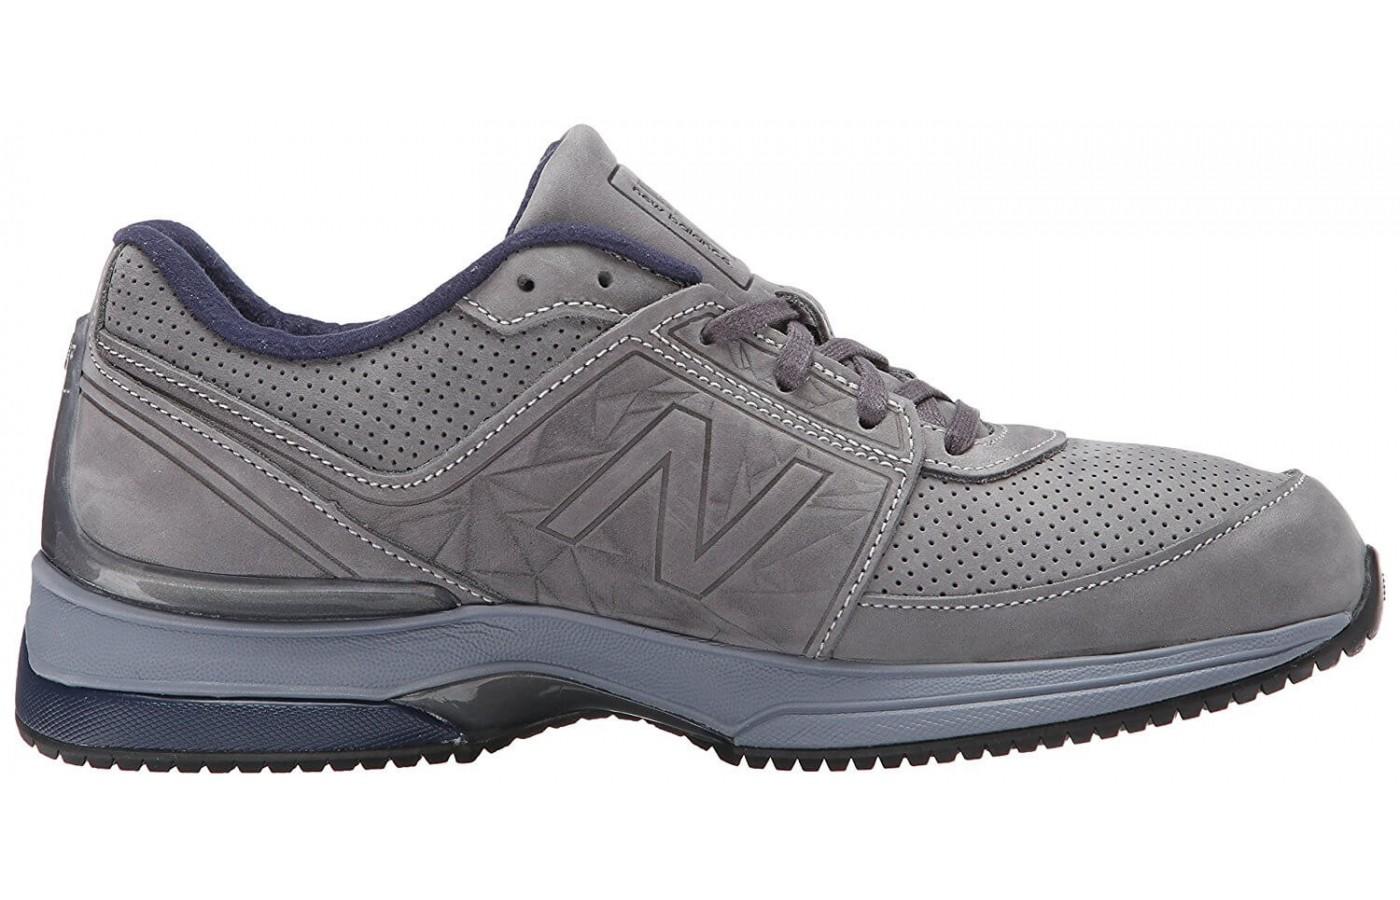 Sideview of the New Balance 2040 v3